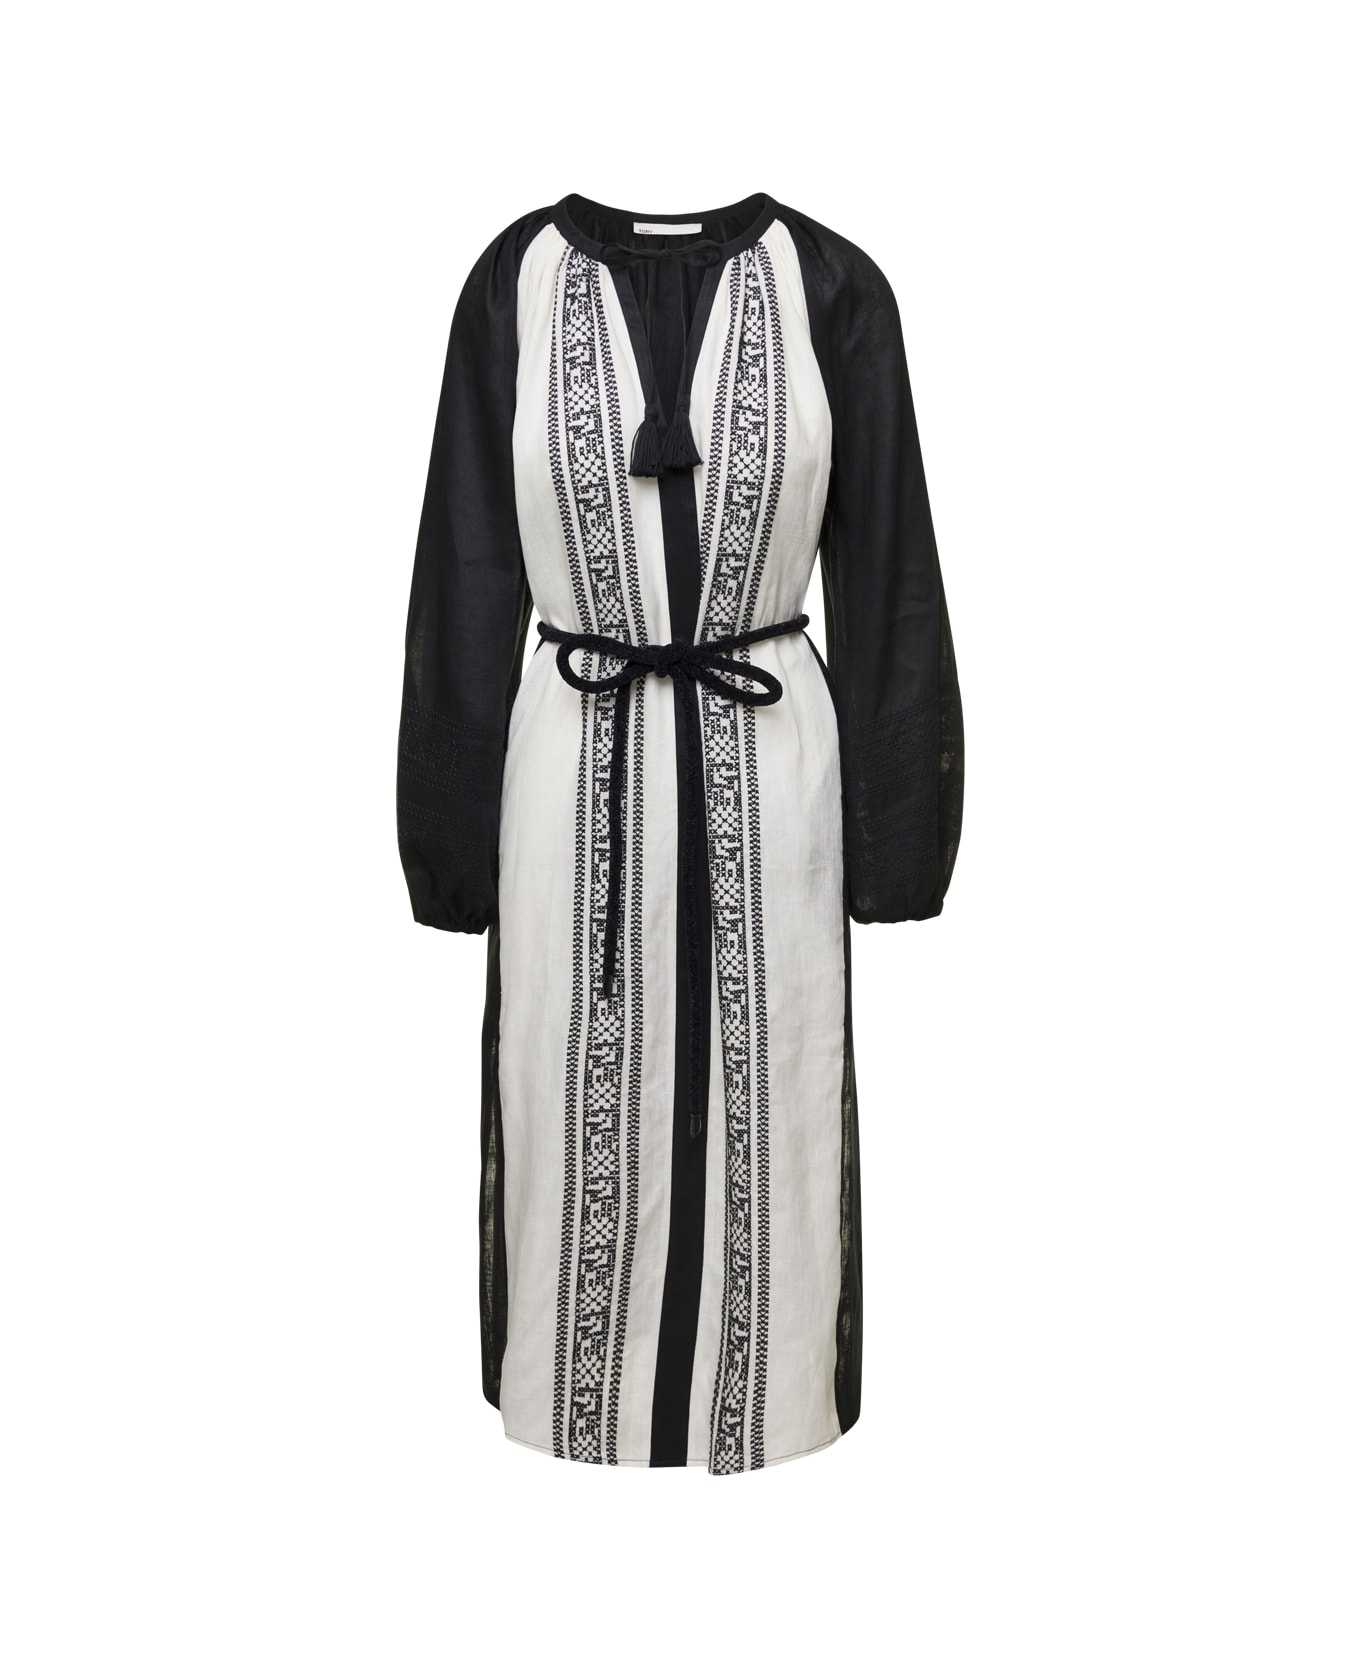 Tory Burch Black And White Embroidered Caftan With Tie And Tassels In Linen Woman Tory Burch - Black